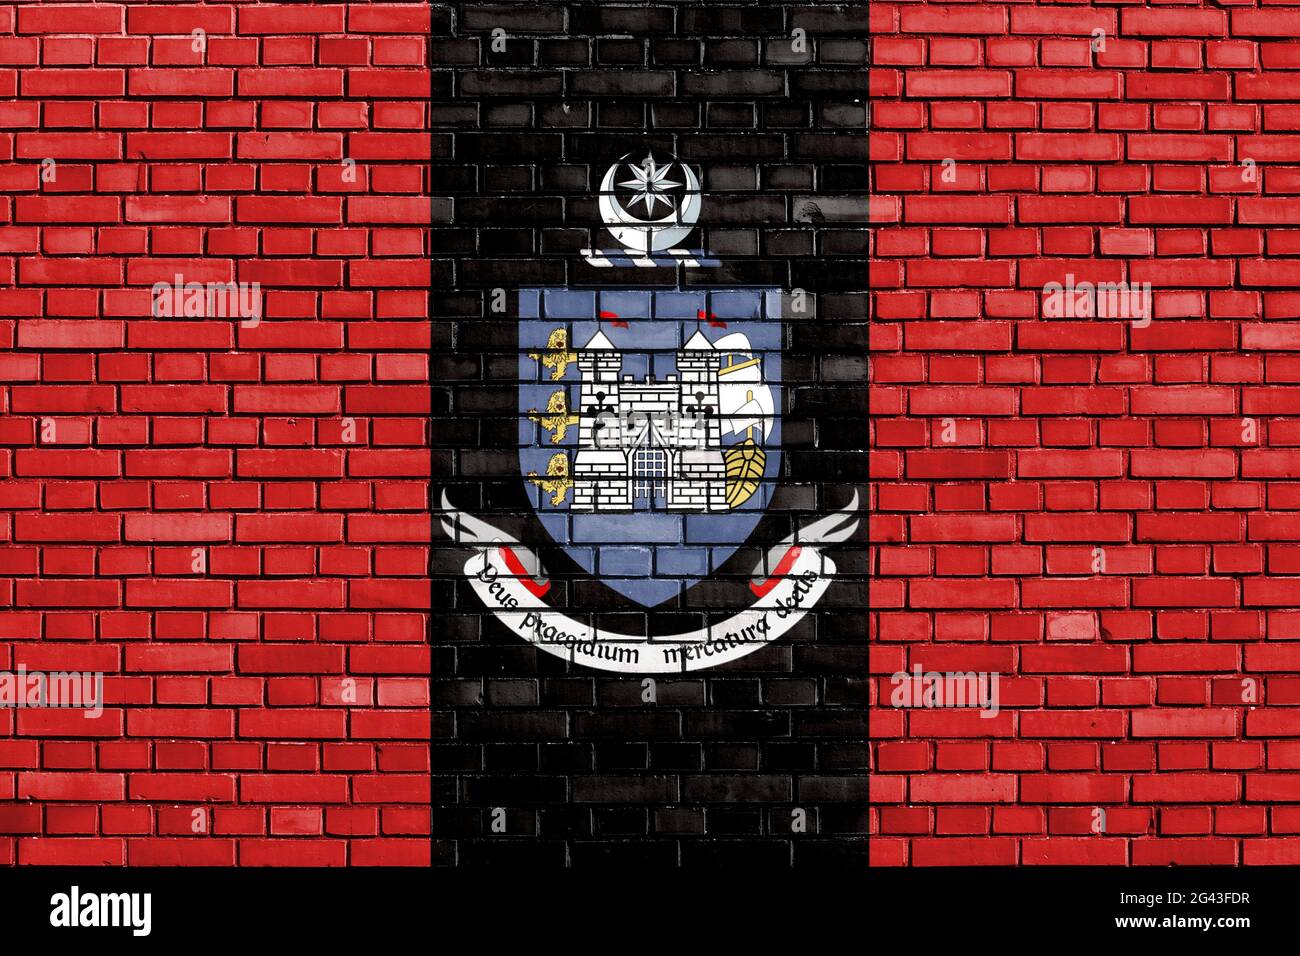 Flag of Drogheda painted on brick wall Stock Photo